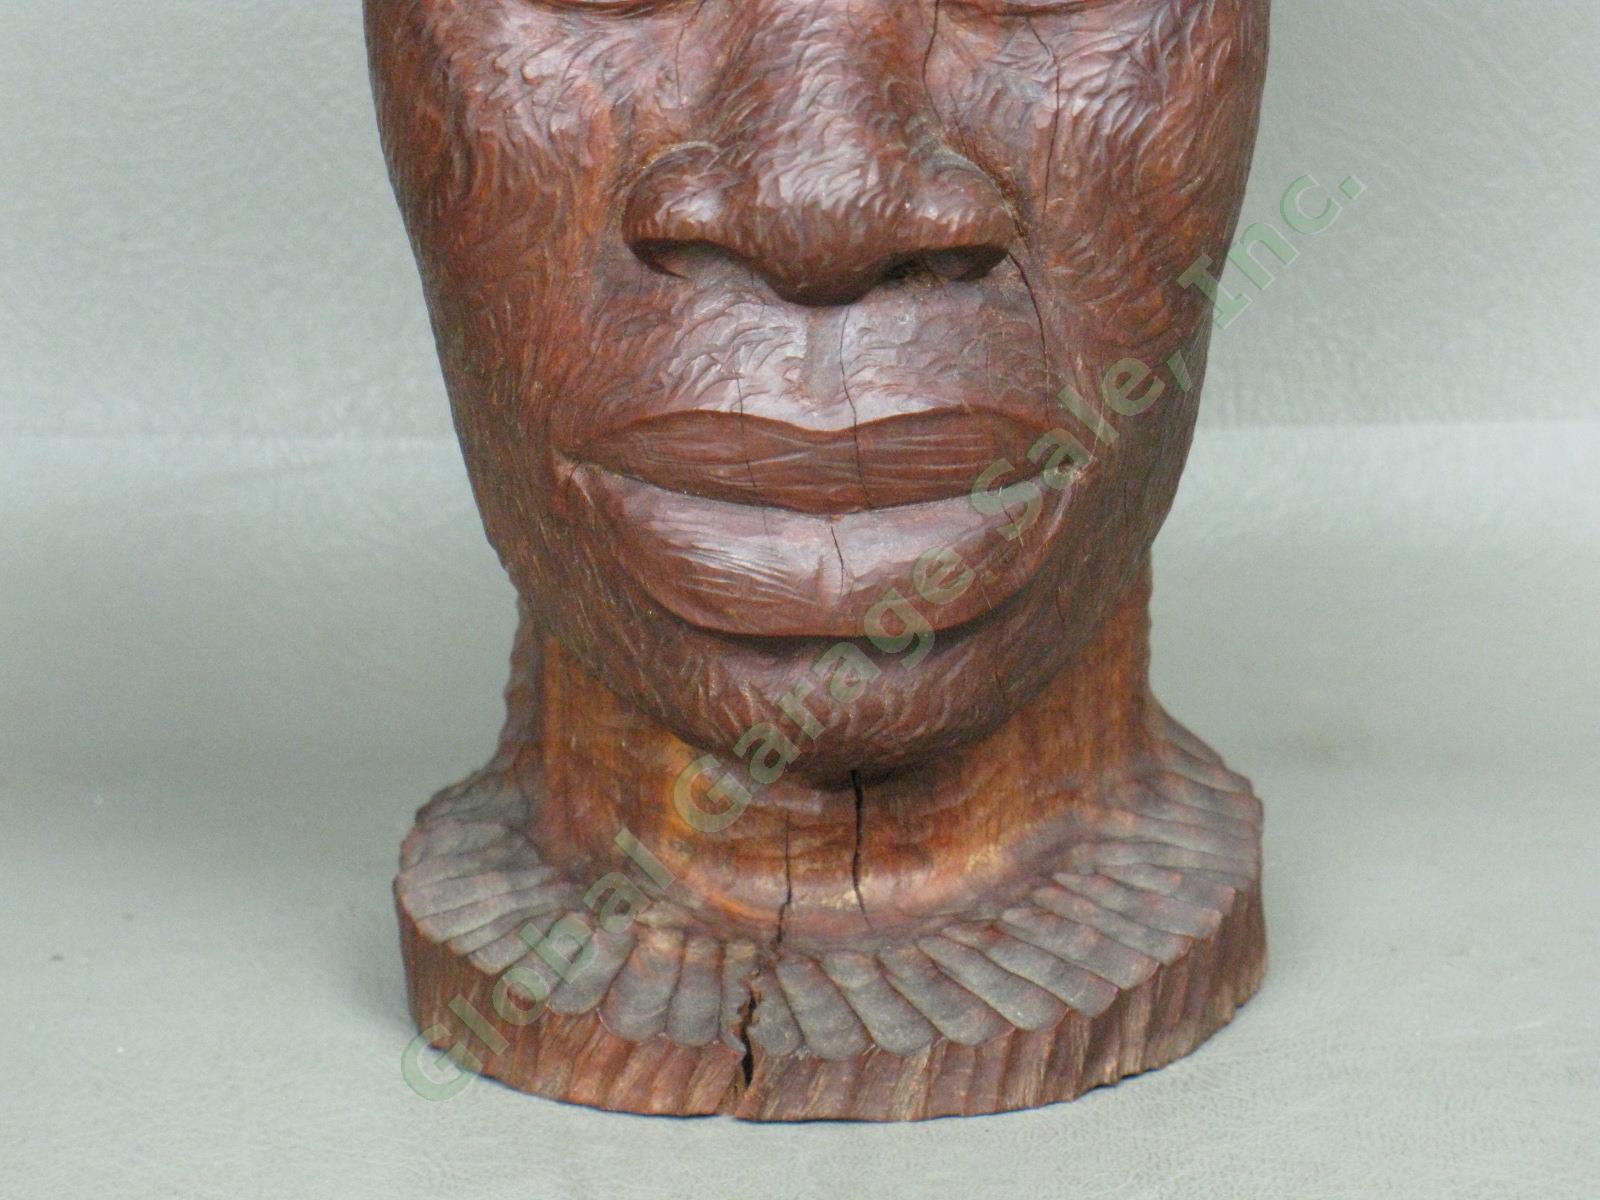 Vtg 1940s Jamaican Jamaica BWI 7" Male Head Bust Wood Carving Signed Lazarus NR! 2